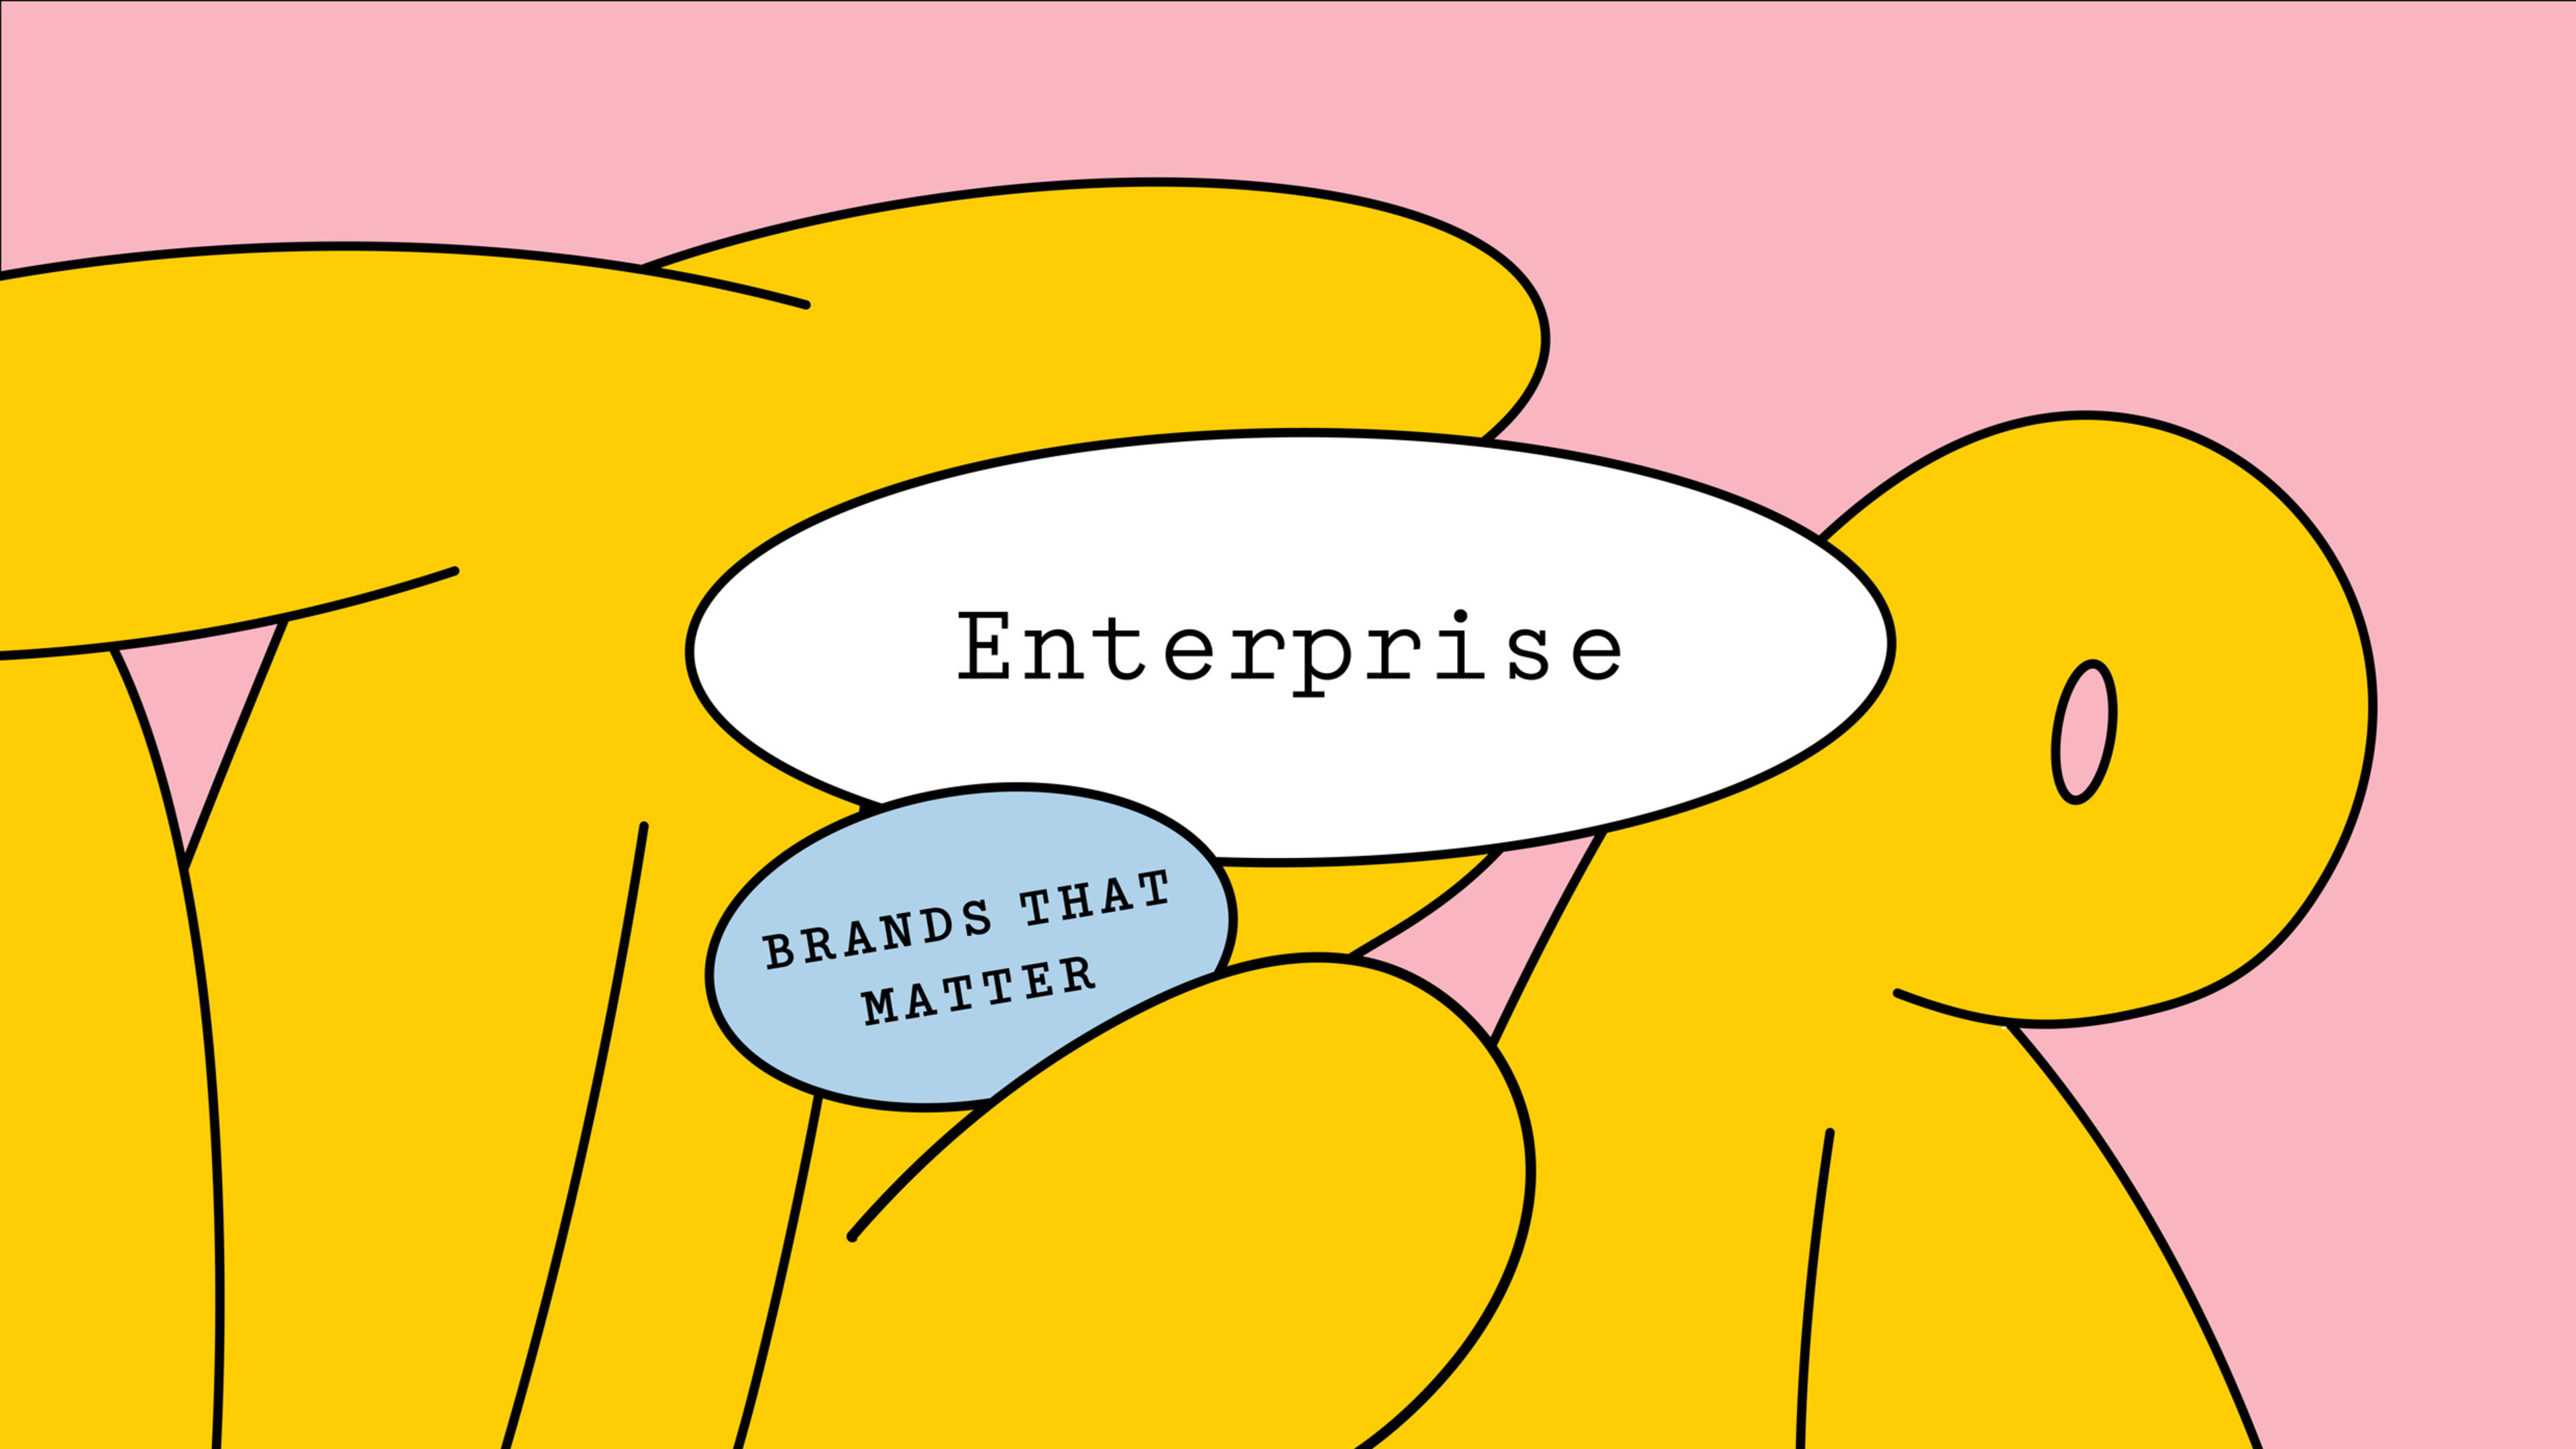 How 3 enterprise brands are enabling the future of work